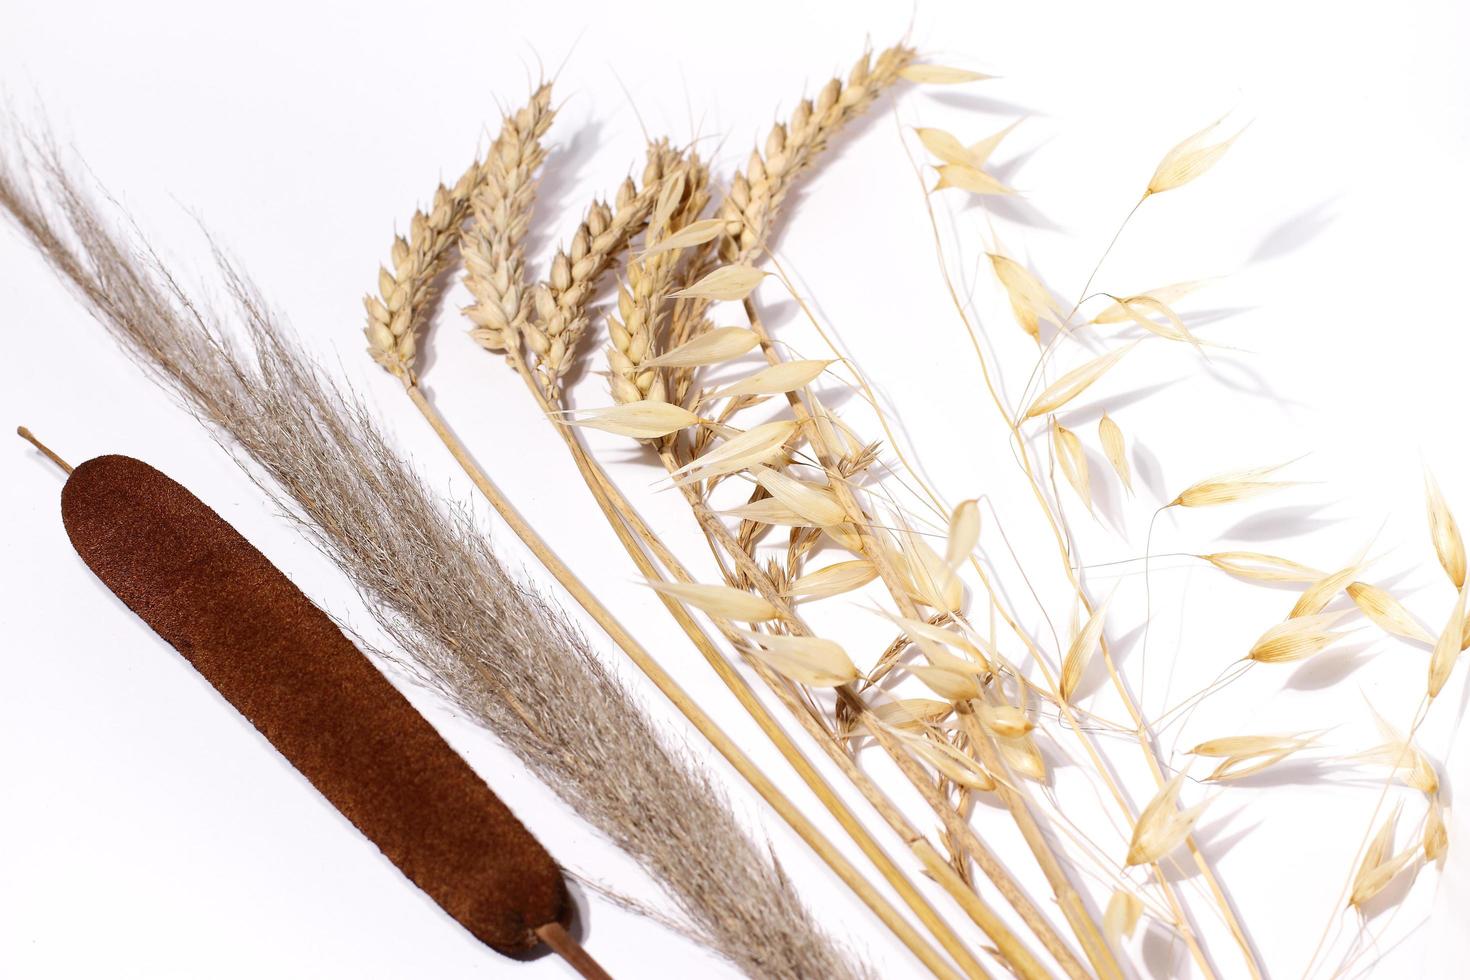 Dried natural spikelets and reeds on white photo